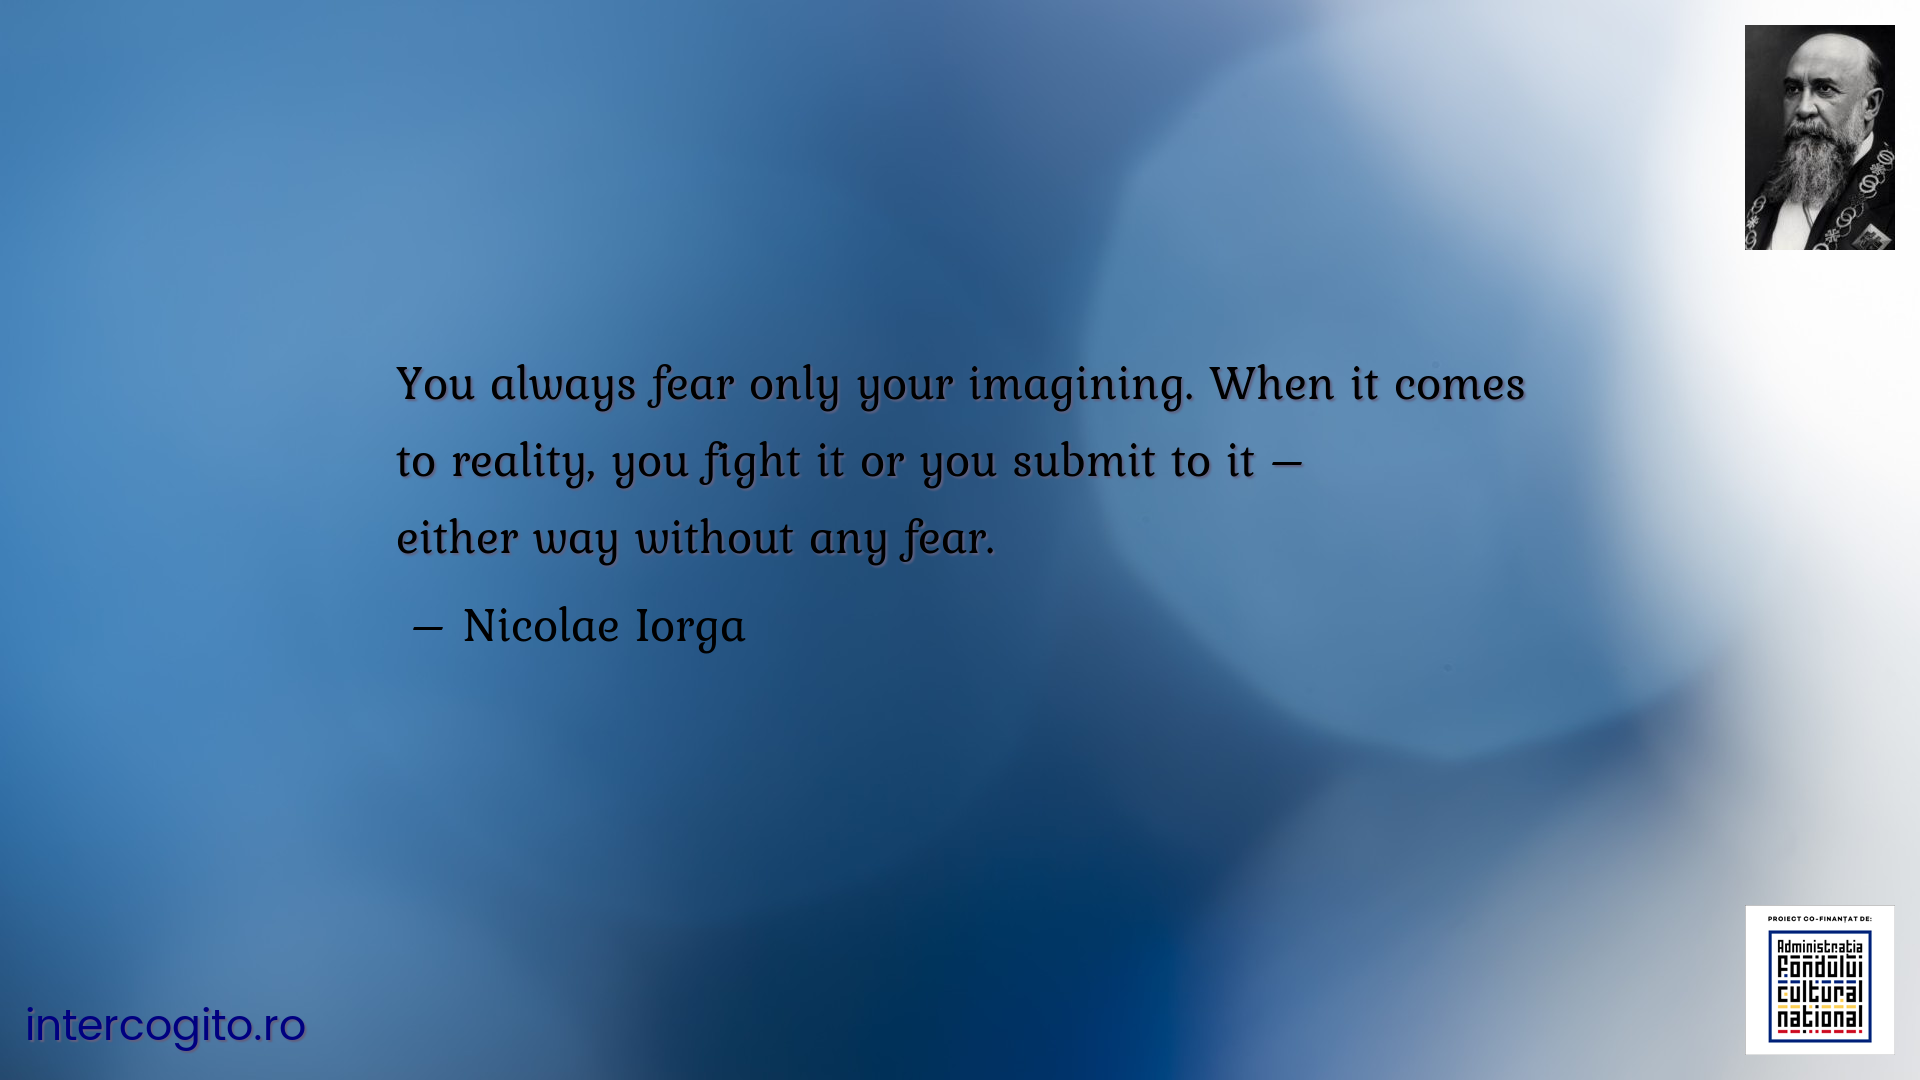 You always fear only your imagining. When it comes to reality, you fight it or you submit to it – either way without any fear.